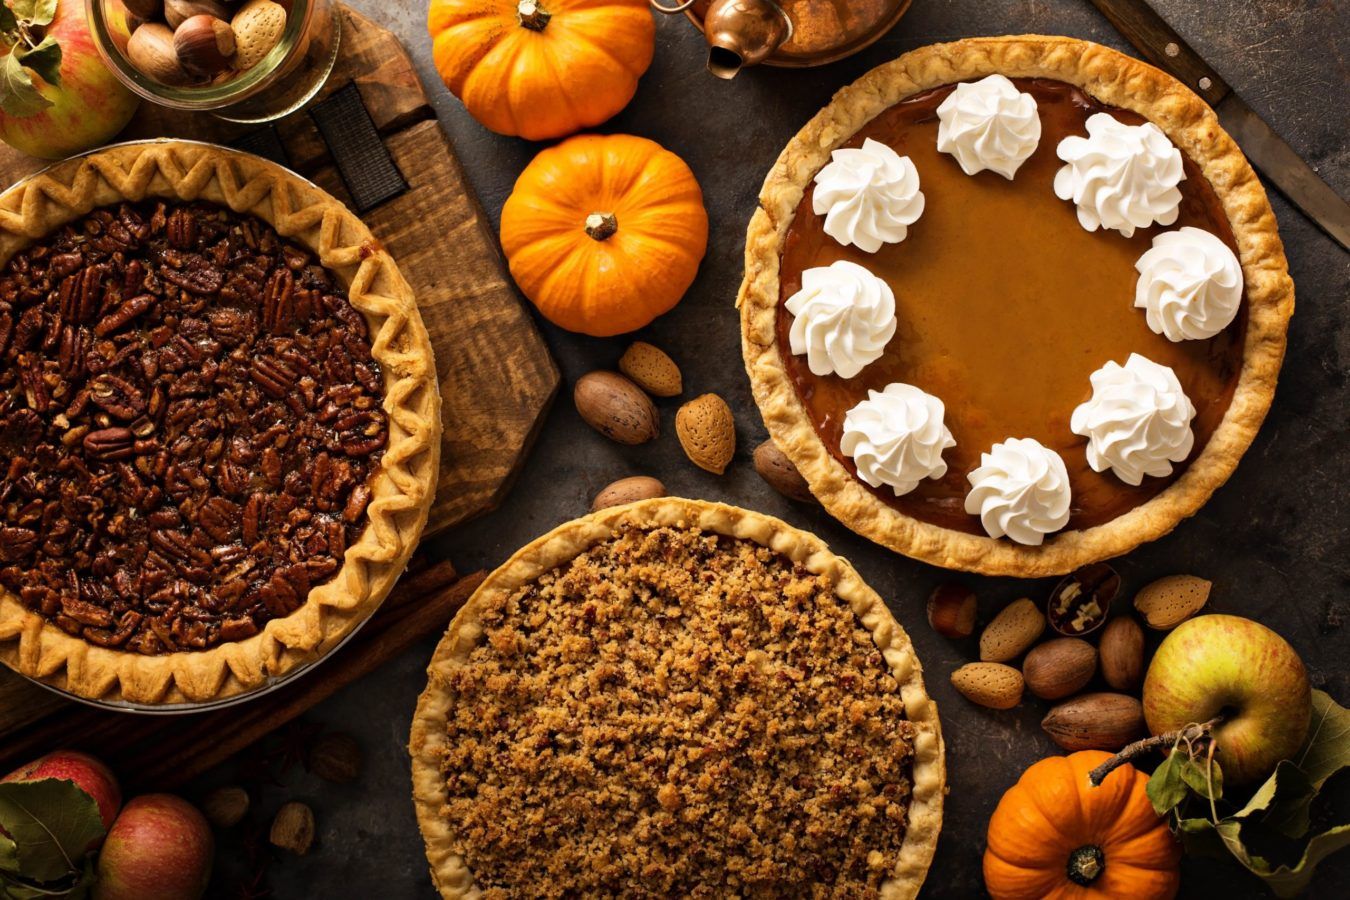 Make your guests happy with these delicious pies to bake at home for the holidays